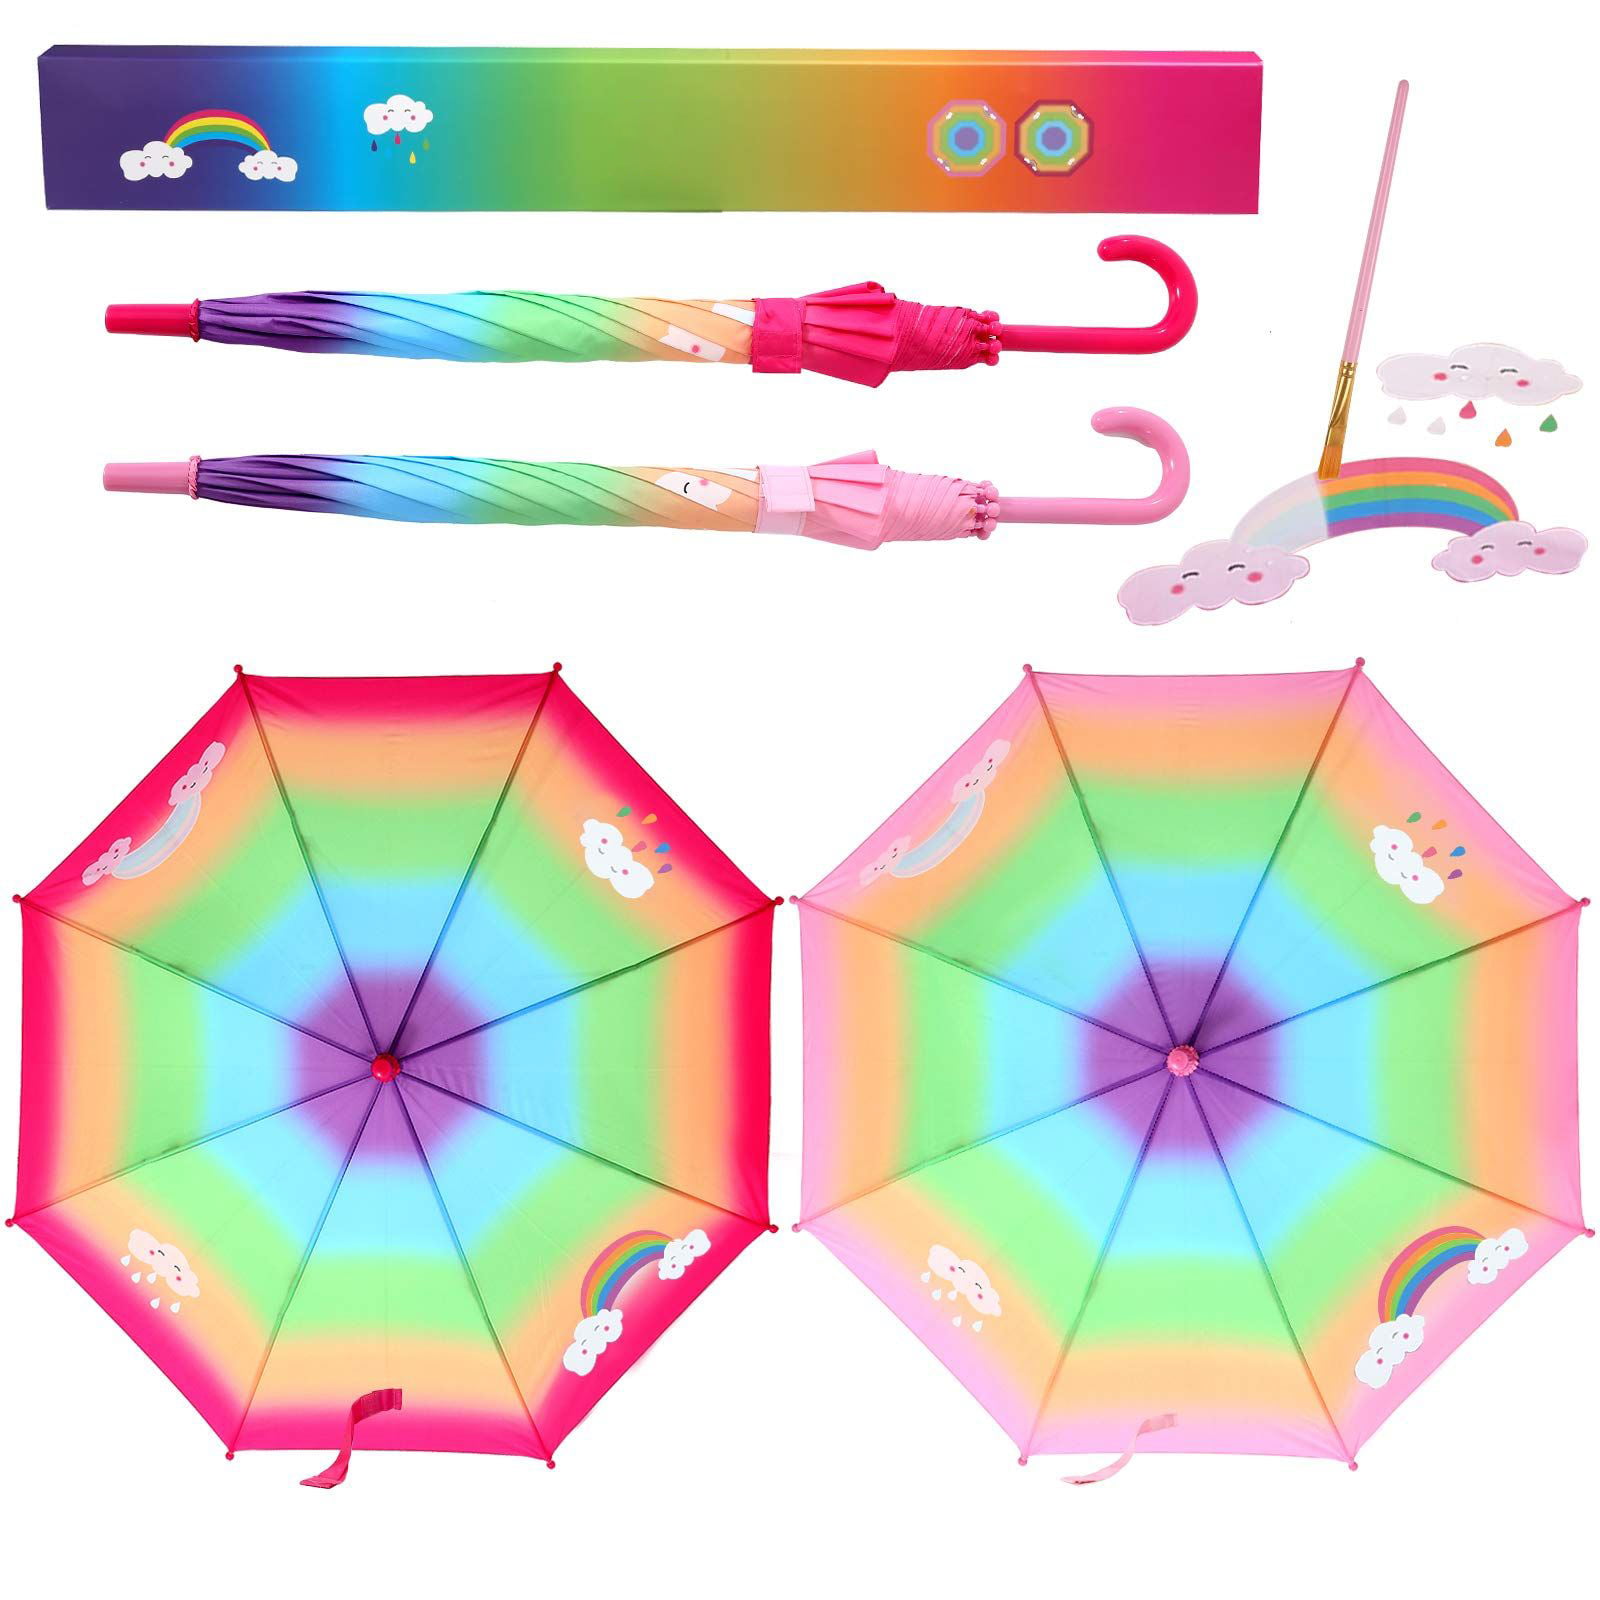 Kids Umbrella 2 Pack Umbrellas Set for Girls with Rainbow and White Cloud Coloring Changing with Water Umbrellas Gift for Birthday Party Favor Christmas Stocking 